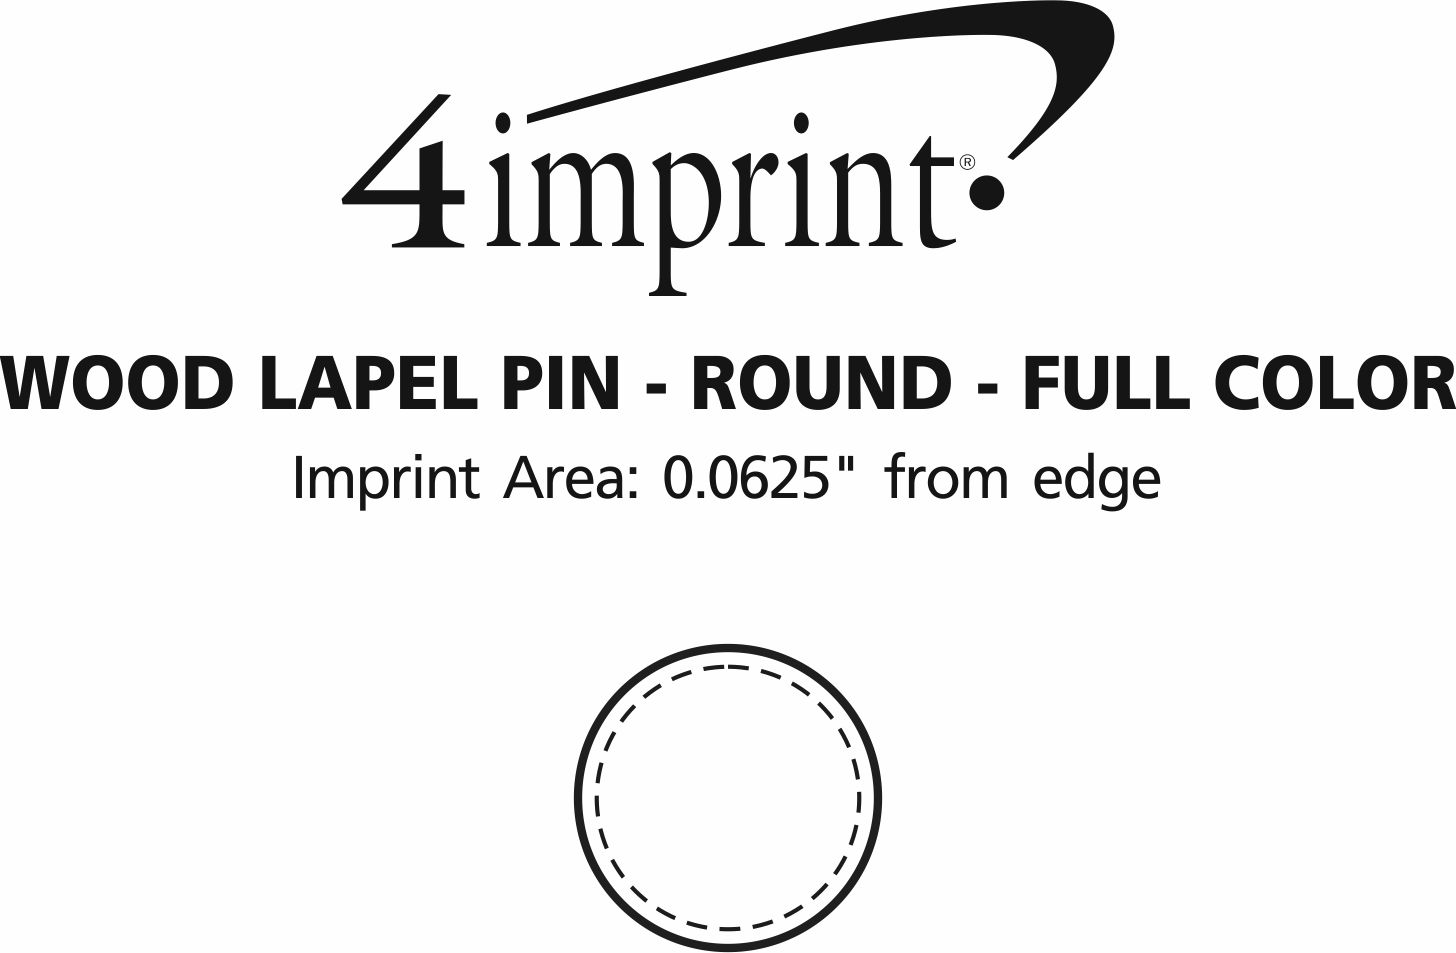 Imprint Area of Wood Lapel Pin - Round - Full Color